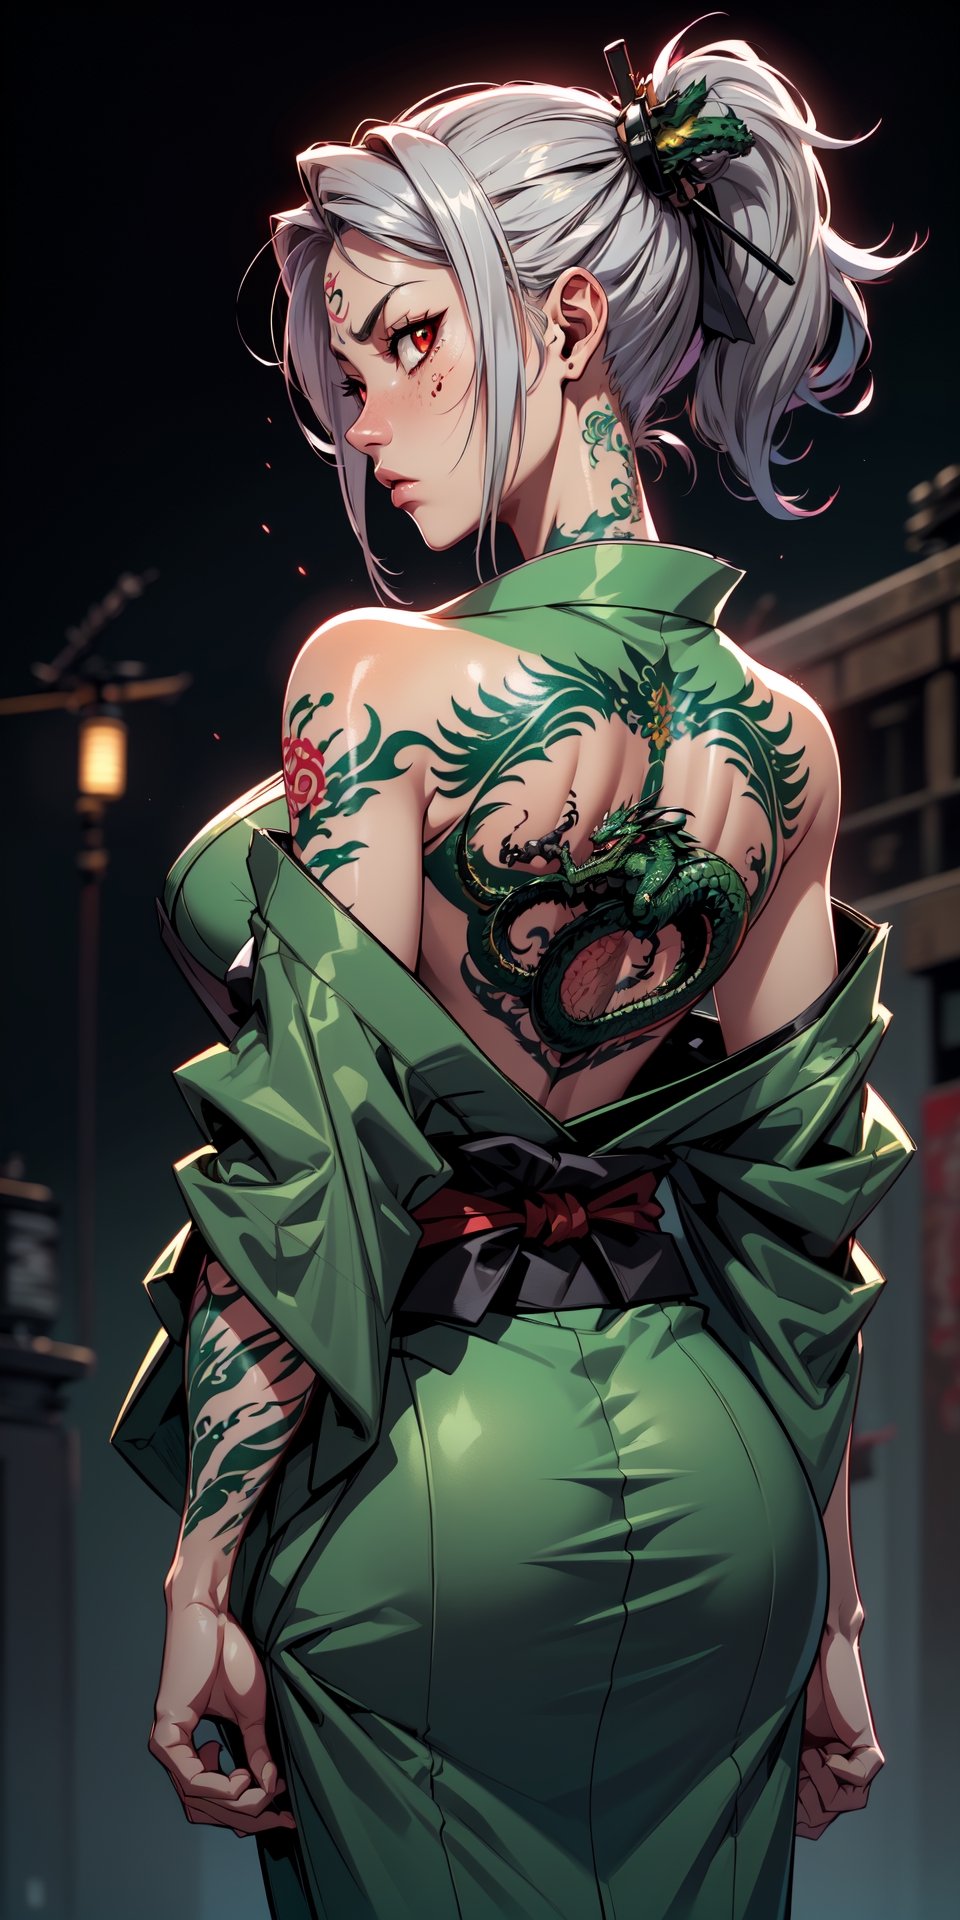  1 girl , samurai,  (((tattoo of a green dragon))), (((dragon tatoo))), back tattoo, cute girl, proper pretty red eyes, angry face looking at camera , Ponytail, (((gray hair))) , blood stains ,  cyborg arm, (((backless))), upper body , (((green kimono))), arms holding katana , Sci-fi, ultra high res, futuristic , {(solo)}, upper body , {(complex background , outdoors space background, Mecha Transport parts)}, Science Fiction,tattoo,